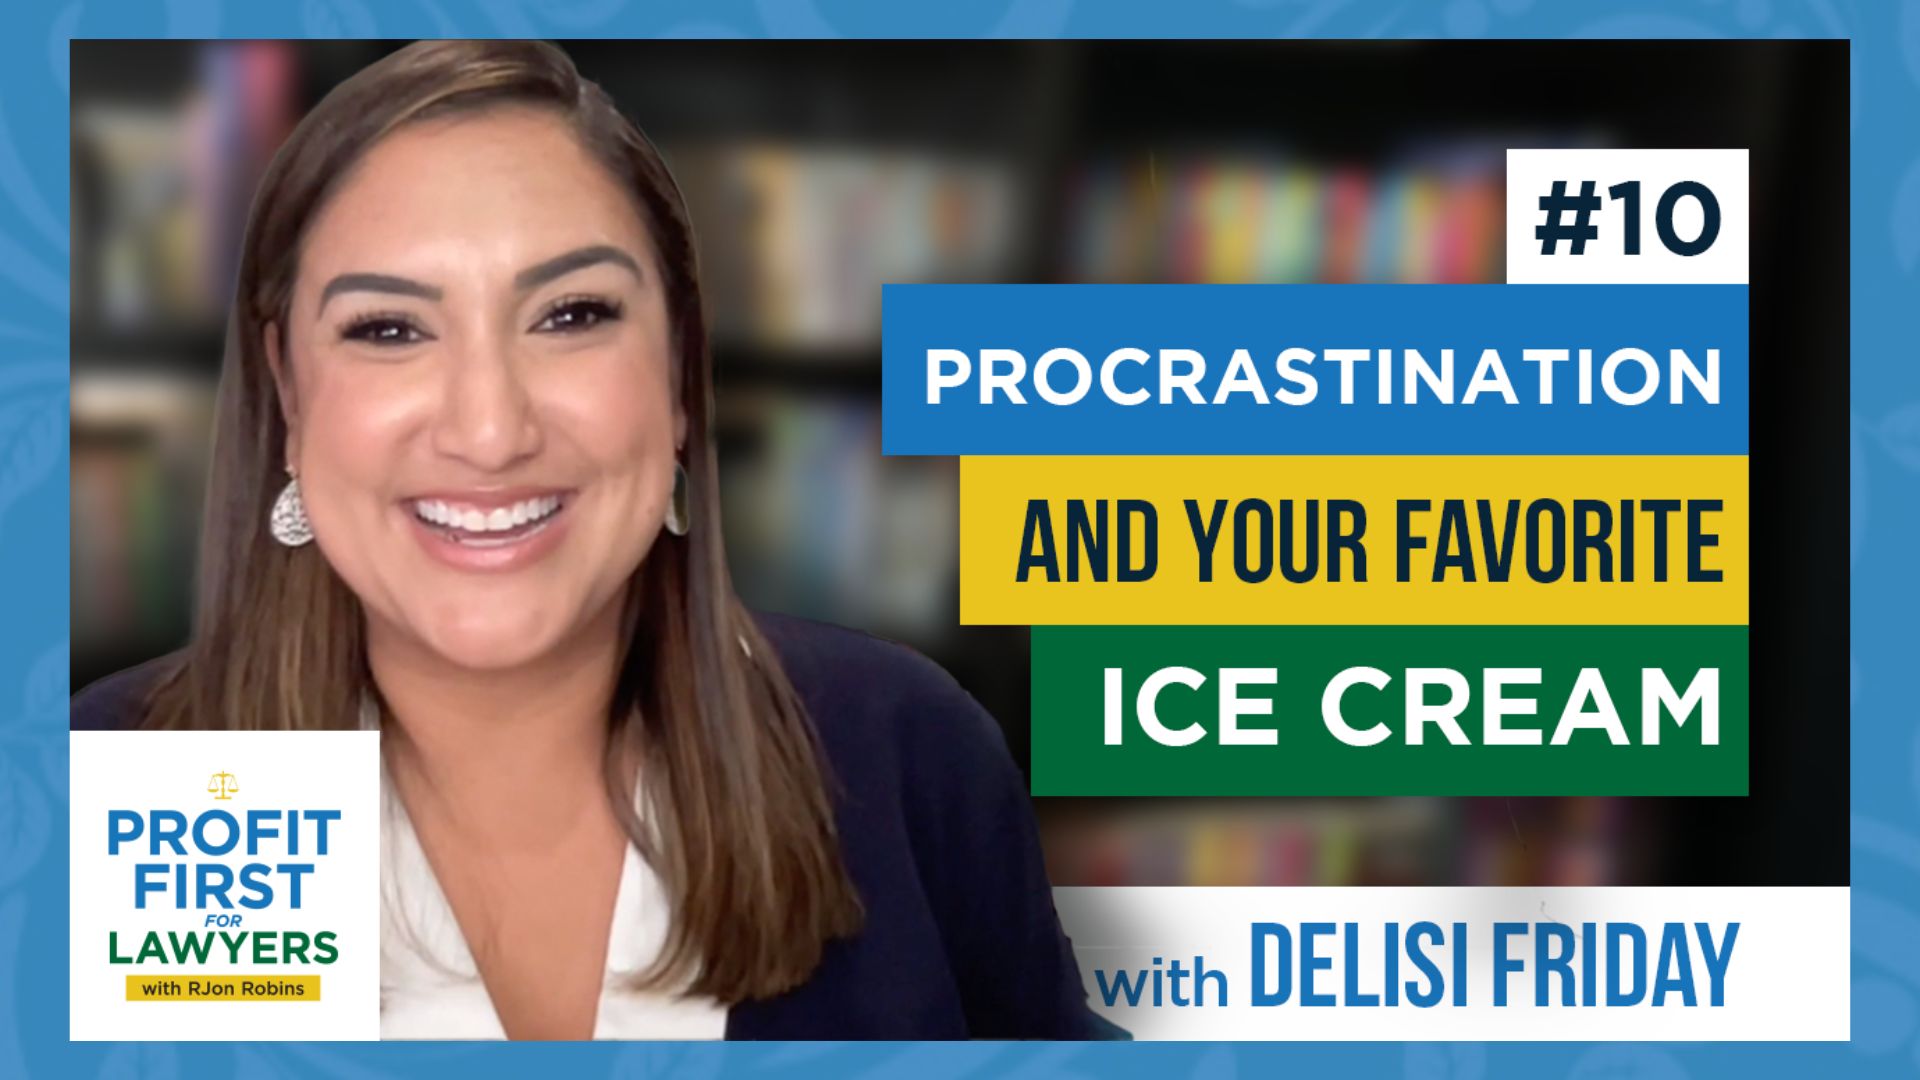 Delisi Friday photo on Profit First For Lawyers episode 10 Procrastination and Your Favorite Ice Cream Flavor wordpress featured image.